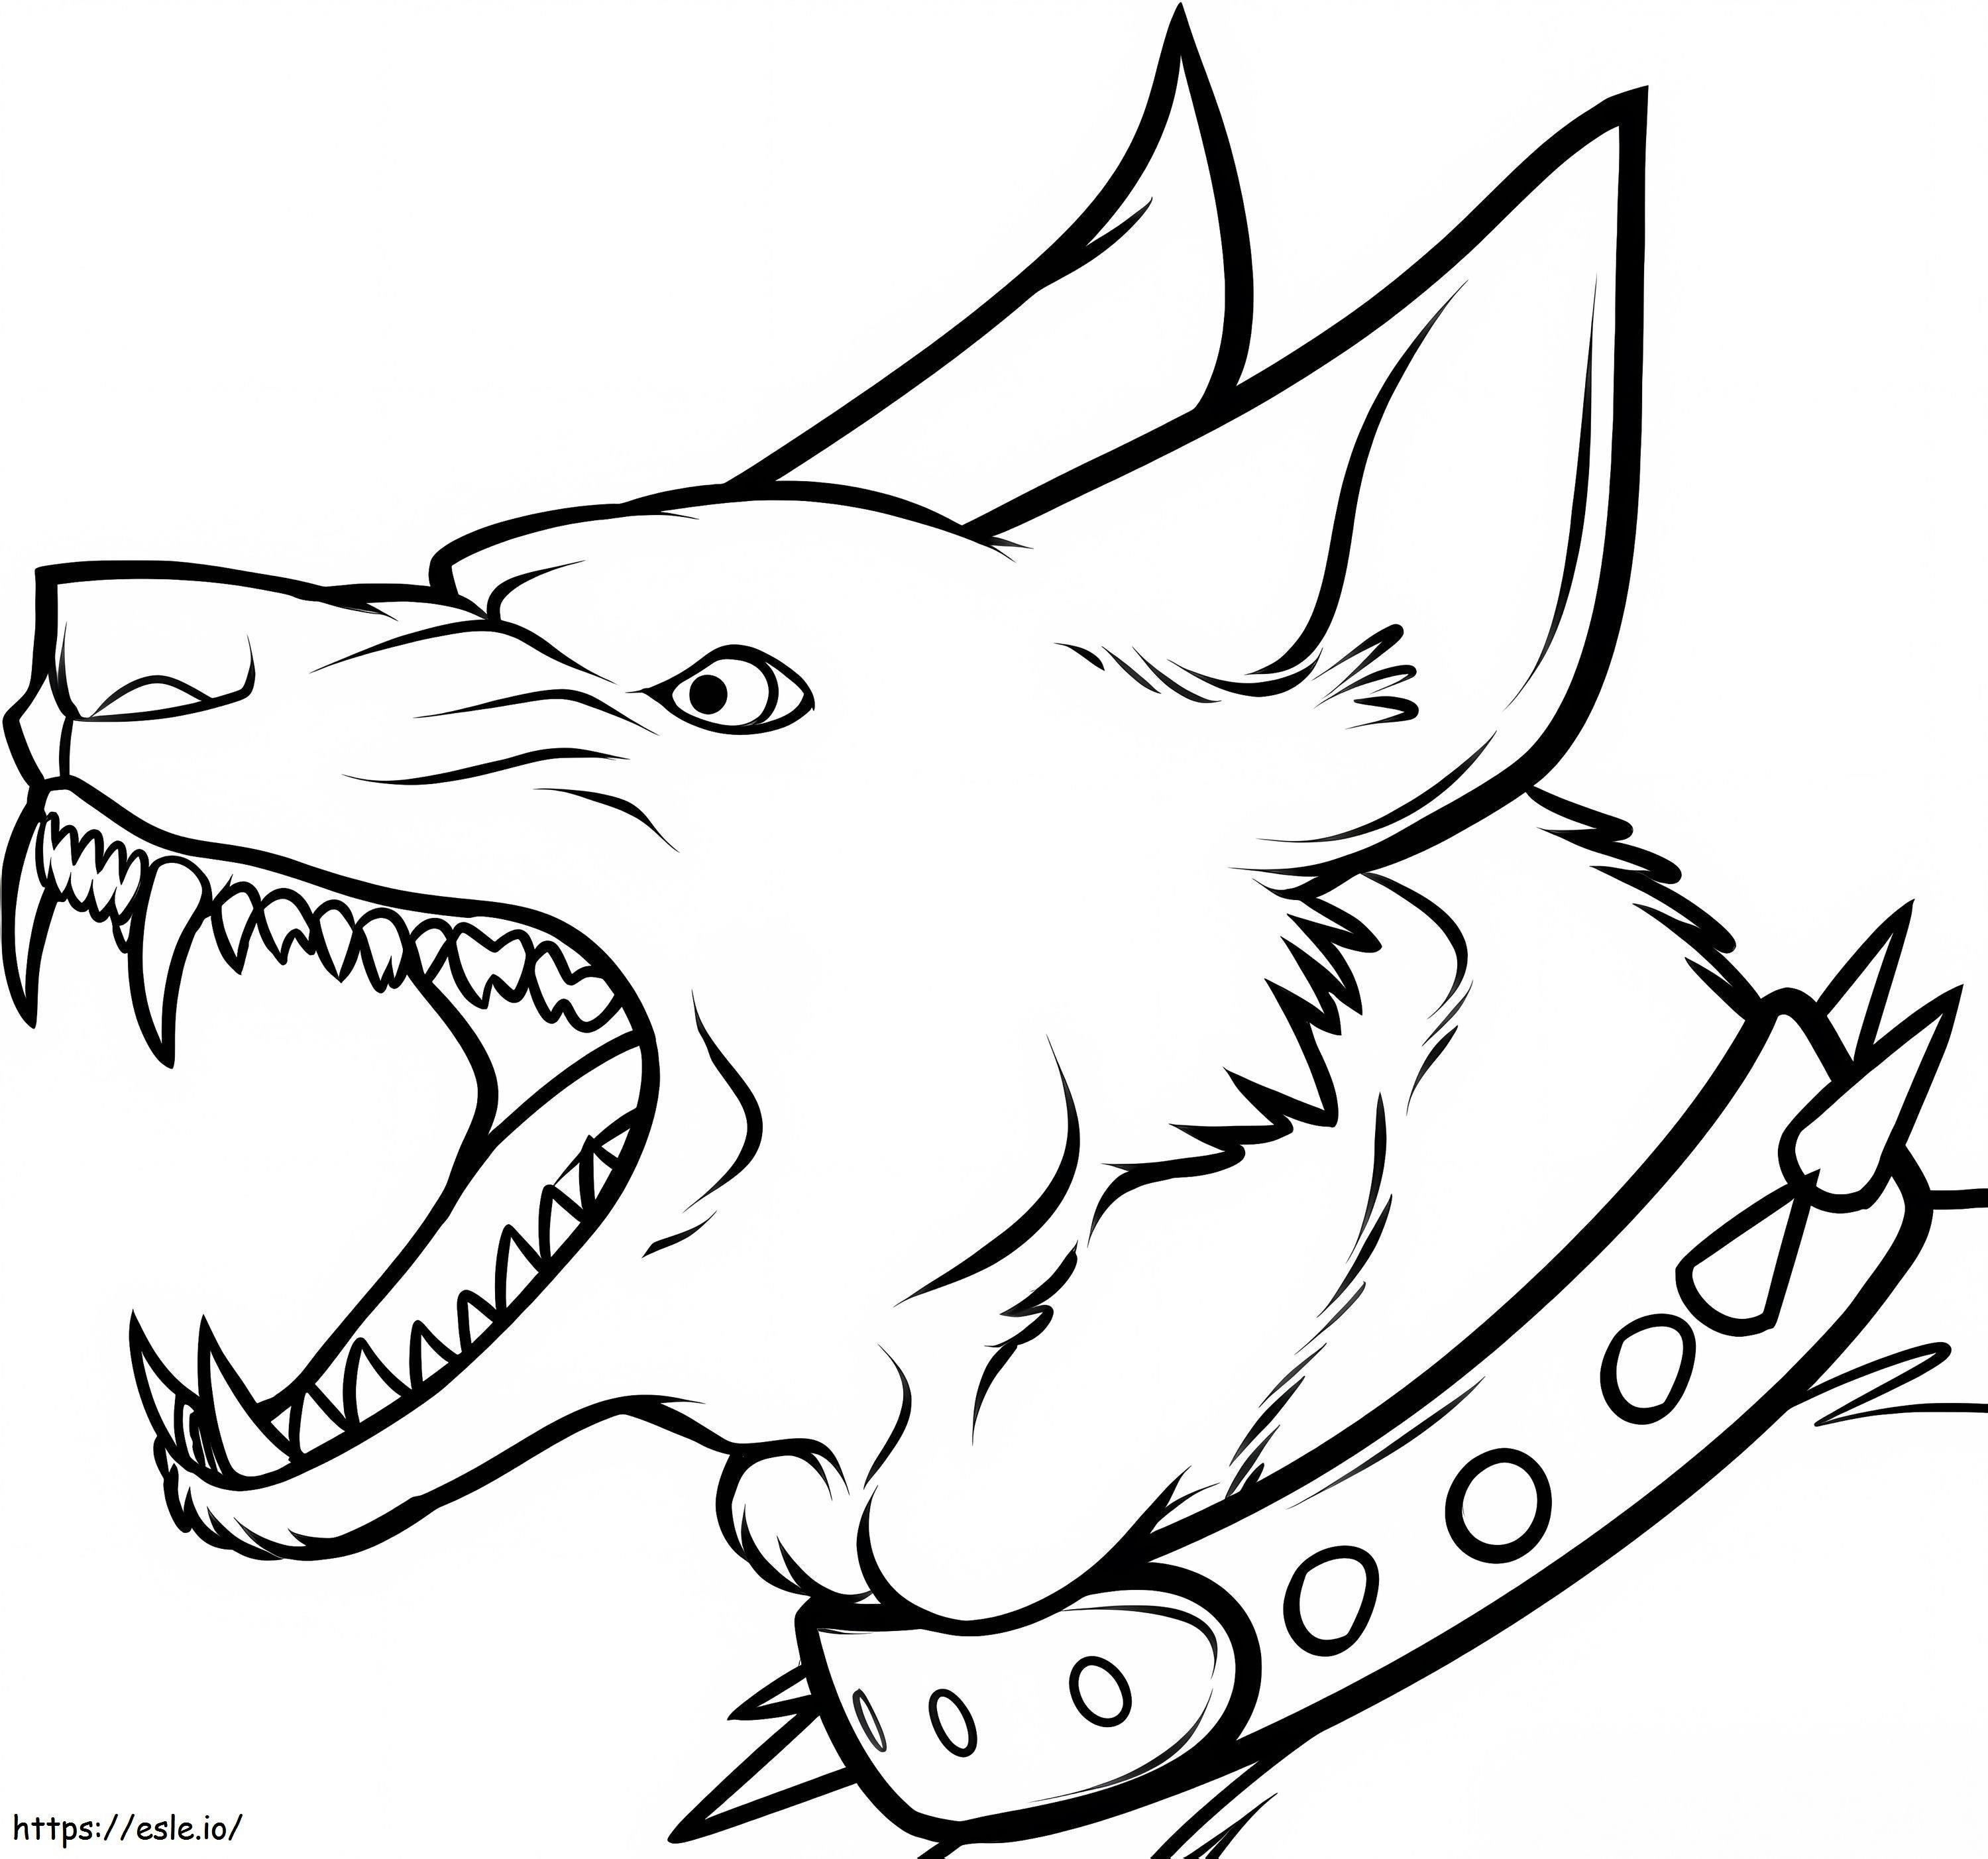 1560563760 Fierce Dog coloring page